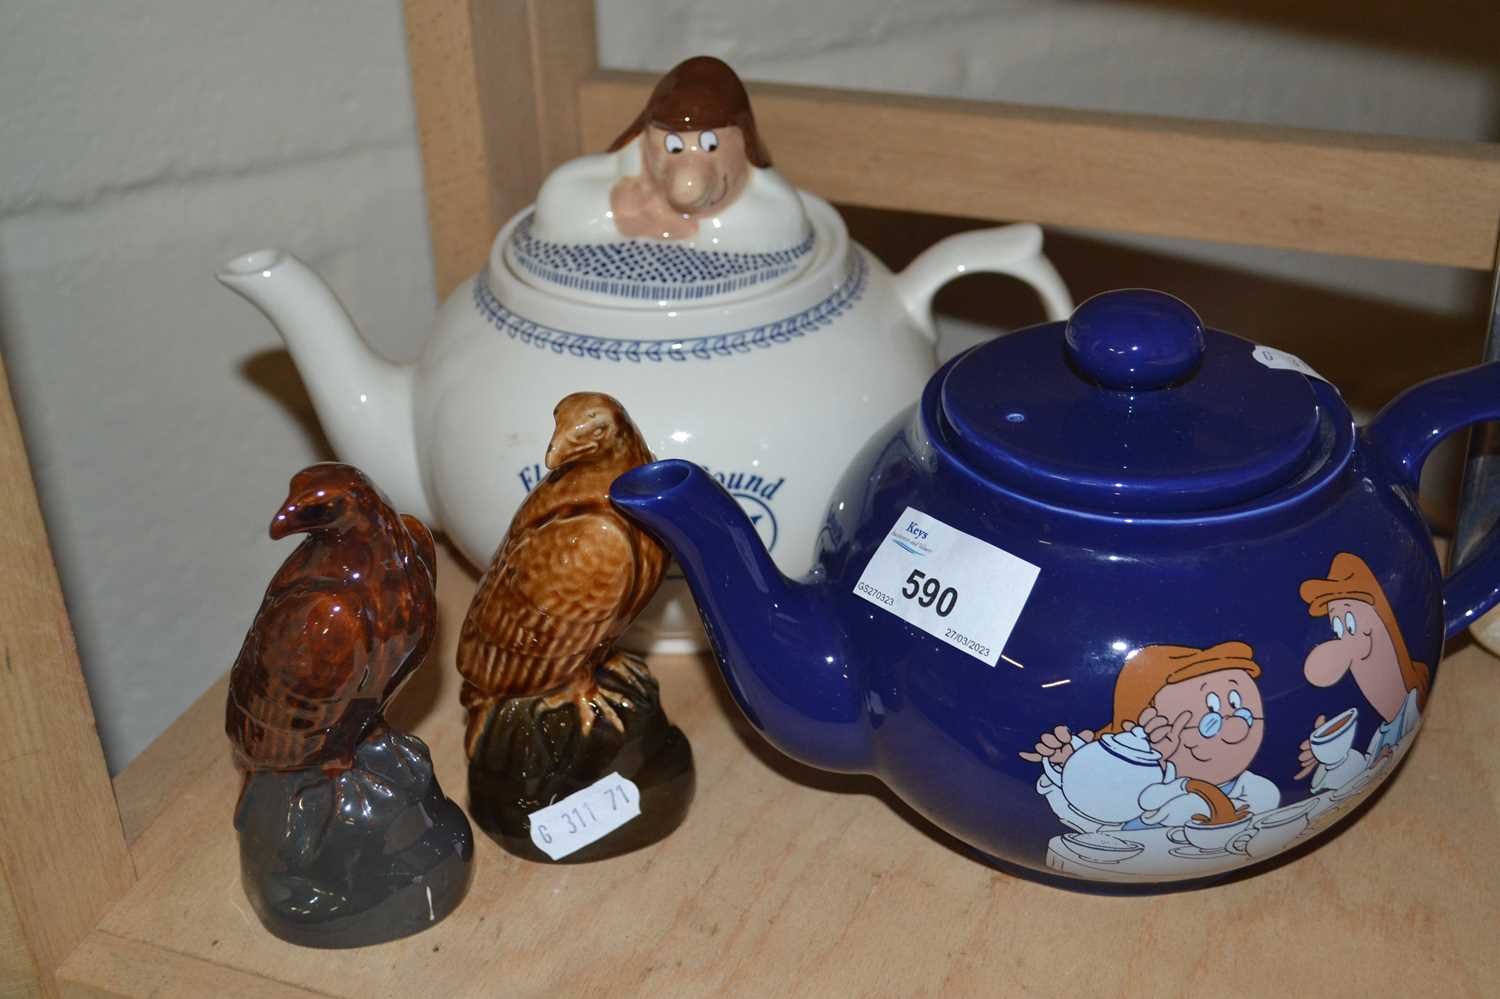 Two commemorative Tetley teapots together with two miniature Beneagles Scotch Whisky decanters